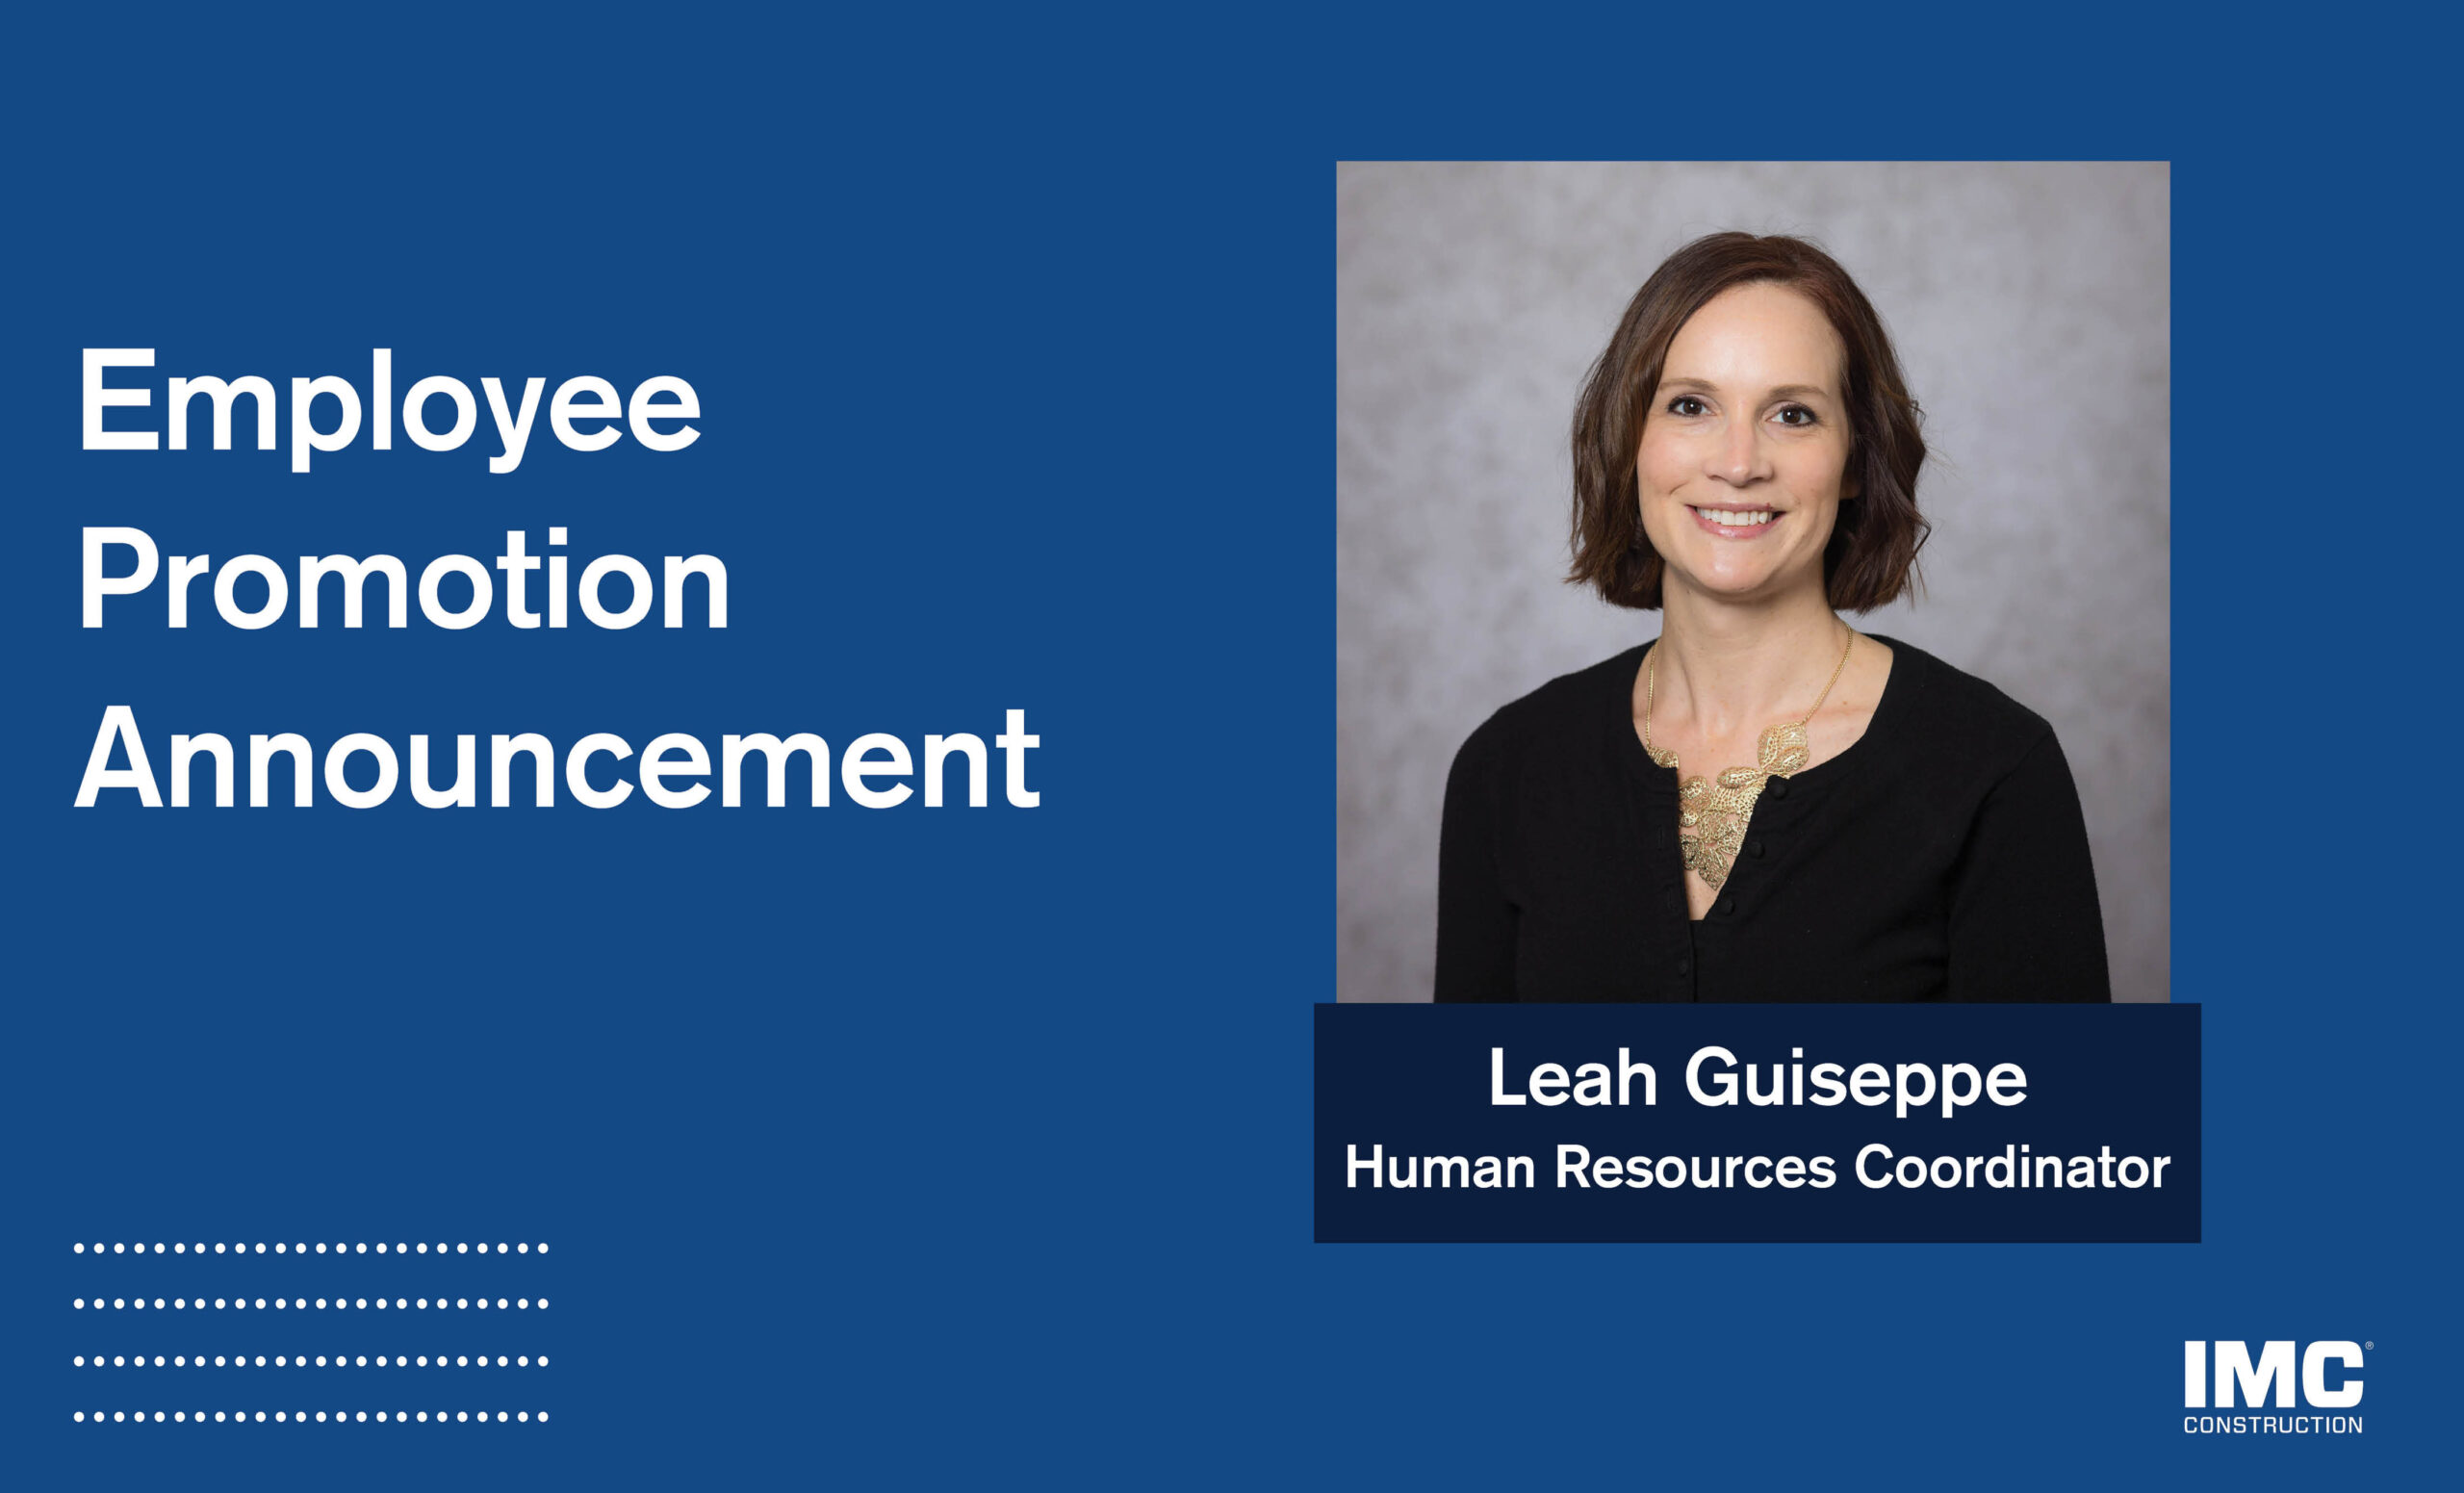 A blue graphic with the words, "Employee Promotion Announcement" and the headshot of Leah Guiseppe with her new title Human Resources Coordinator below it